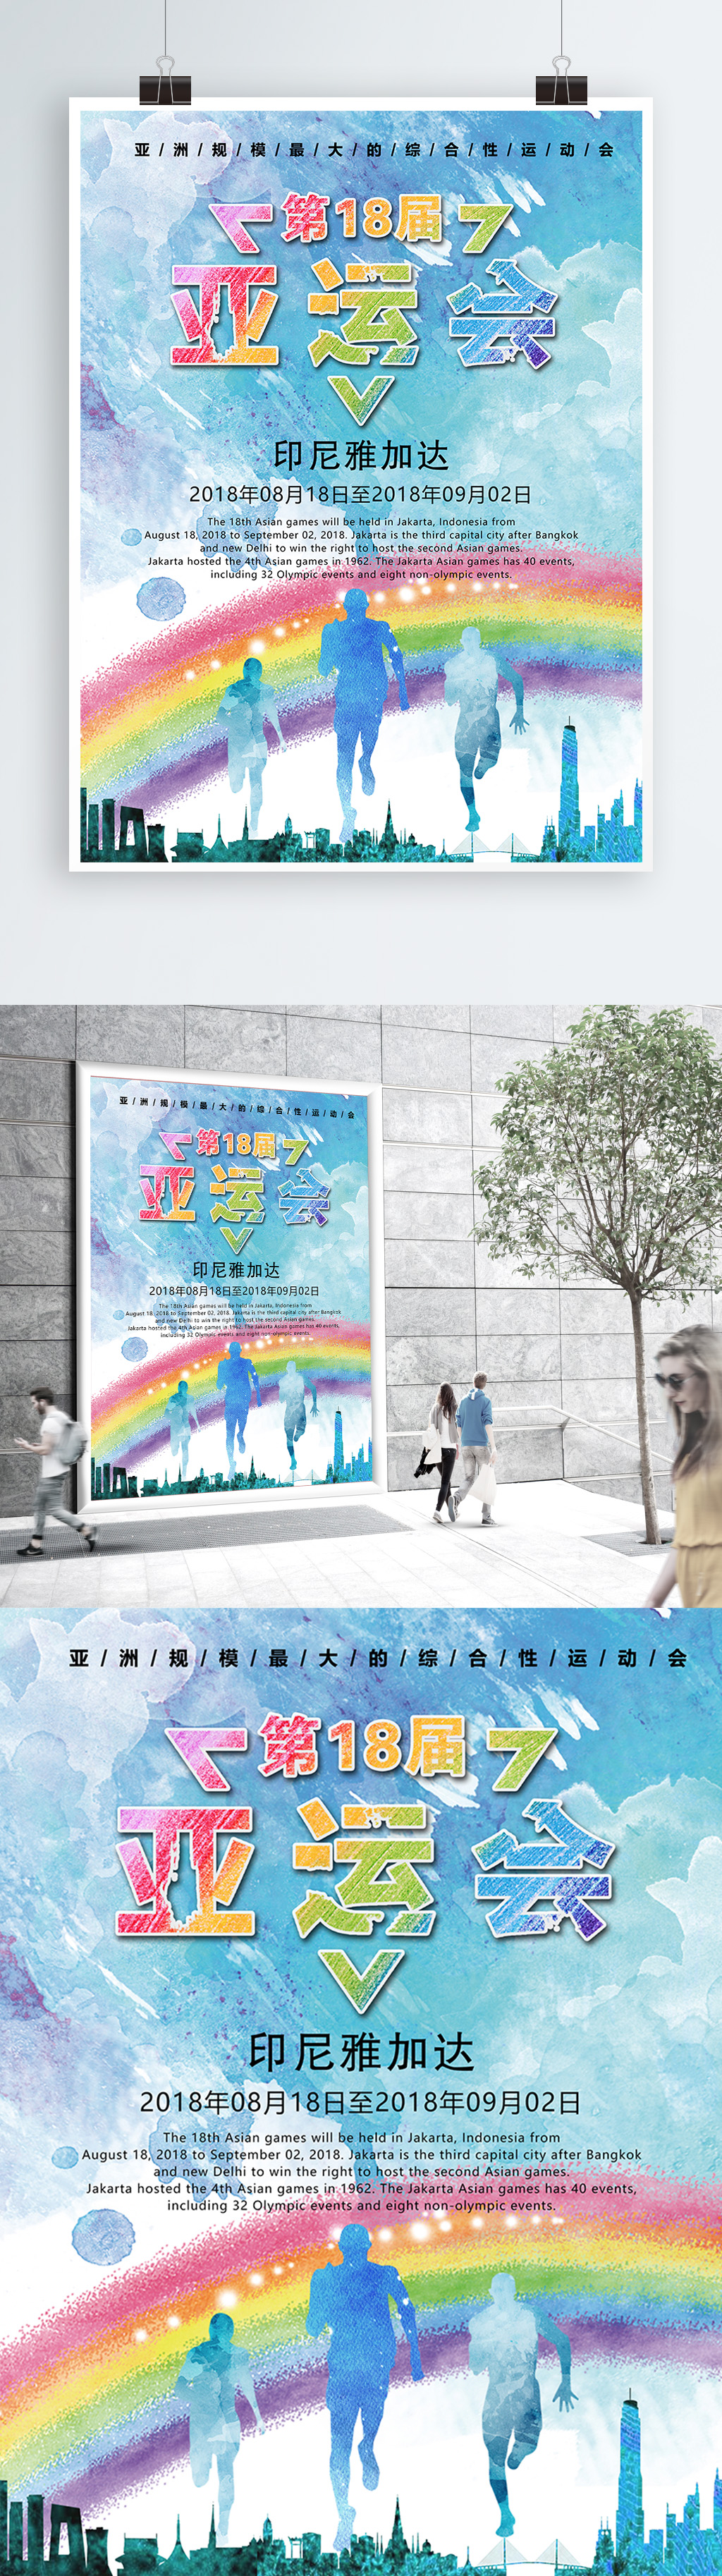 The Most Humid Color Dust Splash Splash Asian Games Poster Template Image Picture Free Download 728889190 Lovepik Com